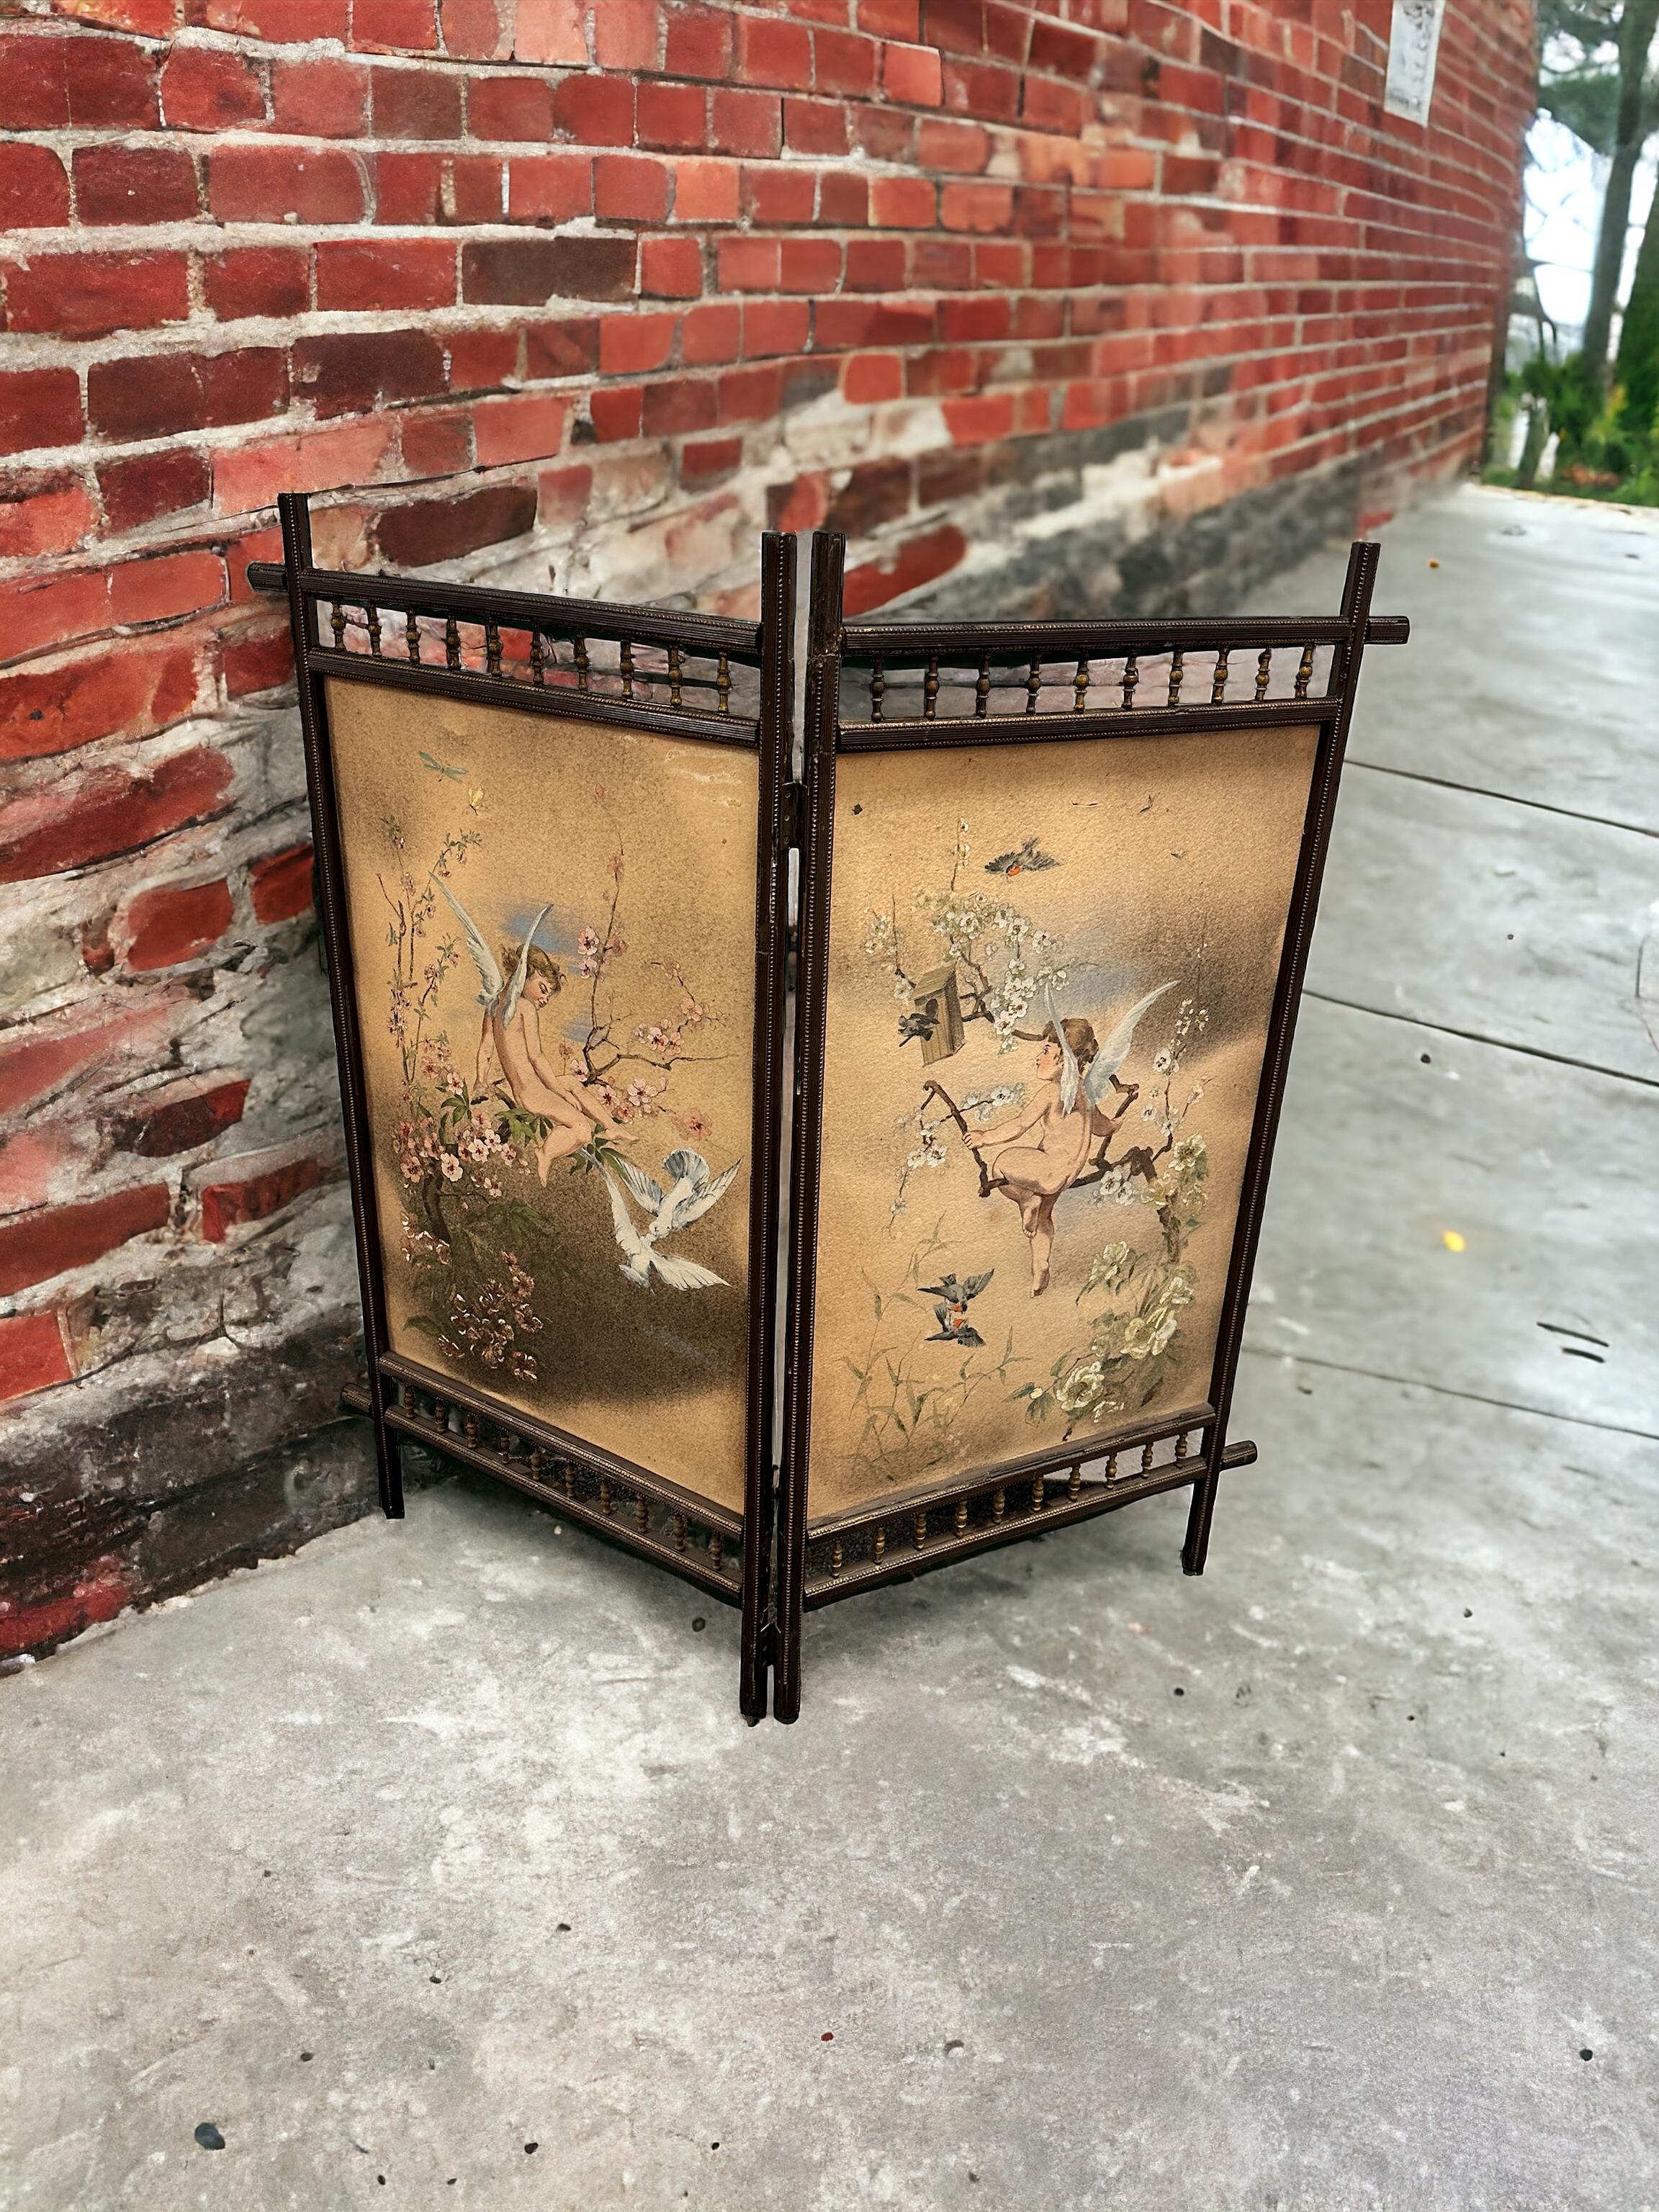 A petite German late 19th or early 20th century screen hand painted on fabric and wood, early 1900s
screen with wooden structure and fabric interior, hand painted on one side. The painted subjects represent two cherub Angels with birds. Can be used